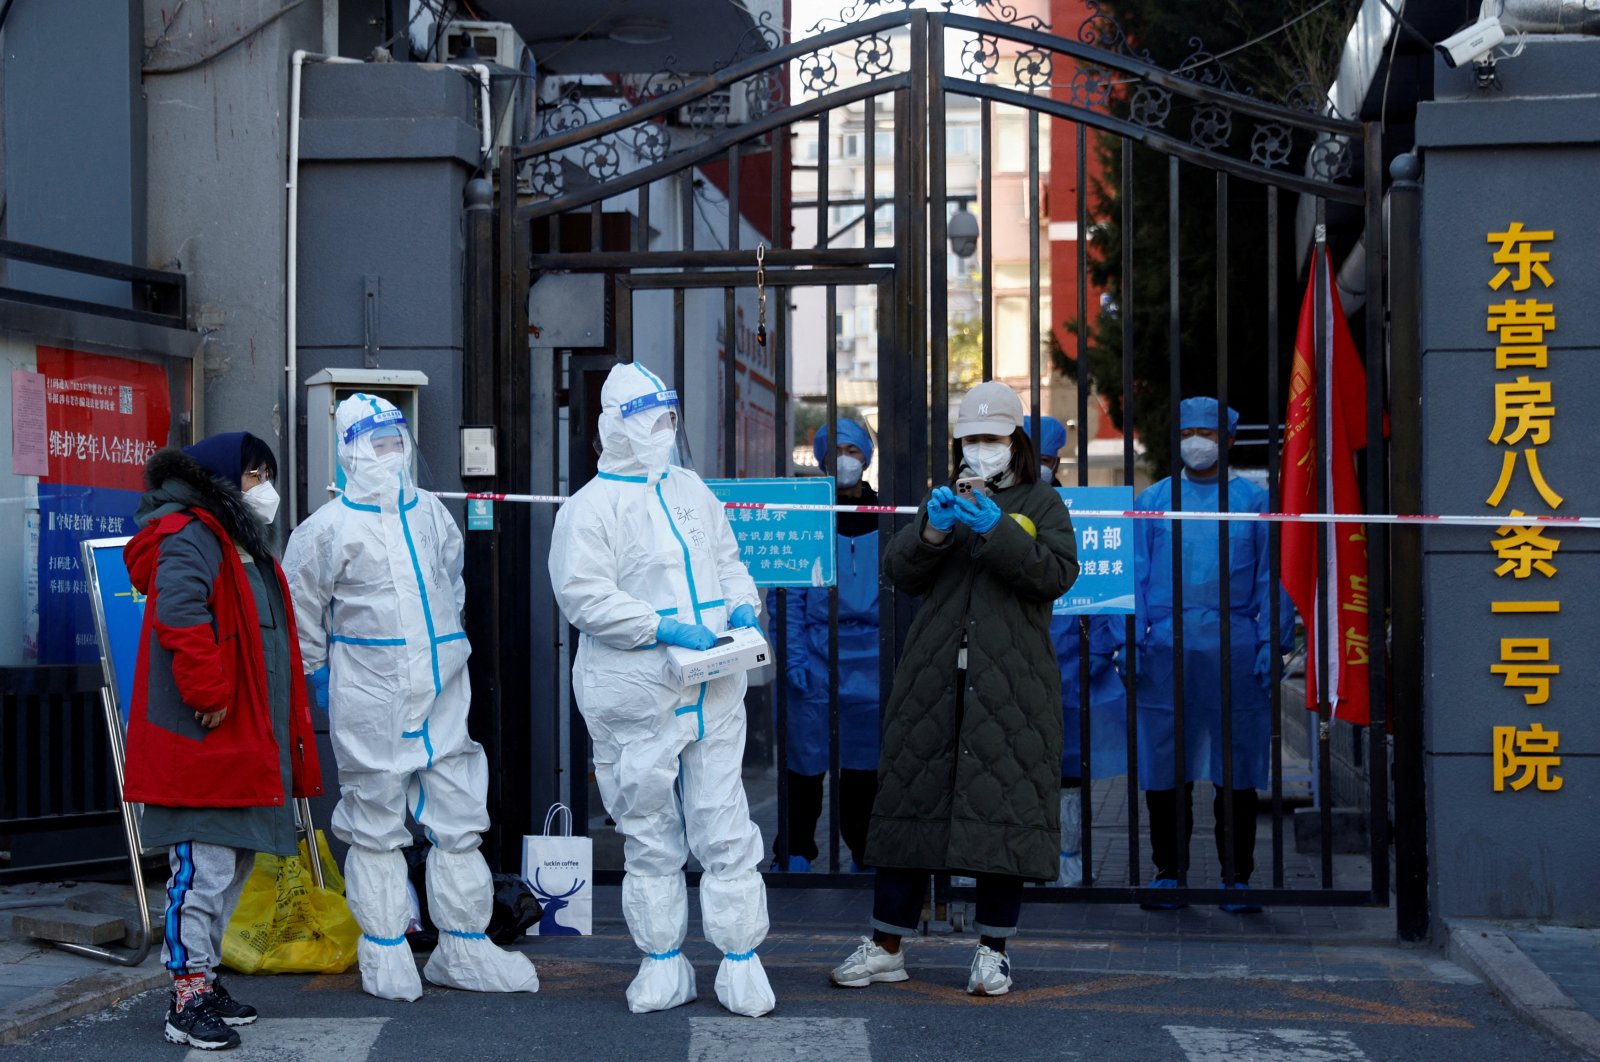 Security personnel in protective suits stand at the gate of a residential compound under COVID-19 lockdown, Beijing, China, Oct. 22, 2022. (Reuters Photo)